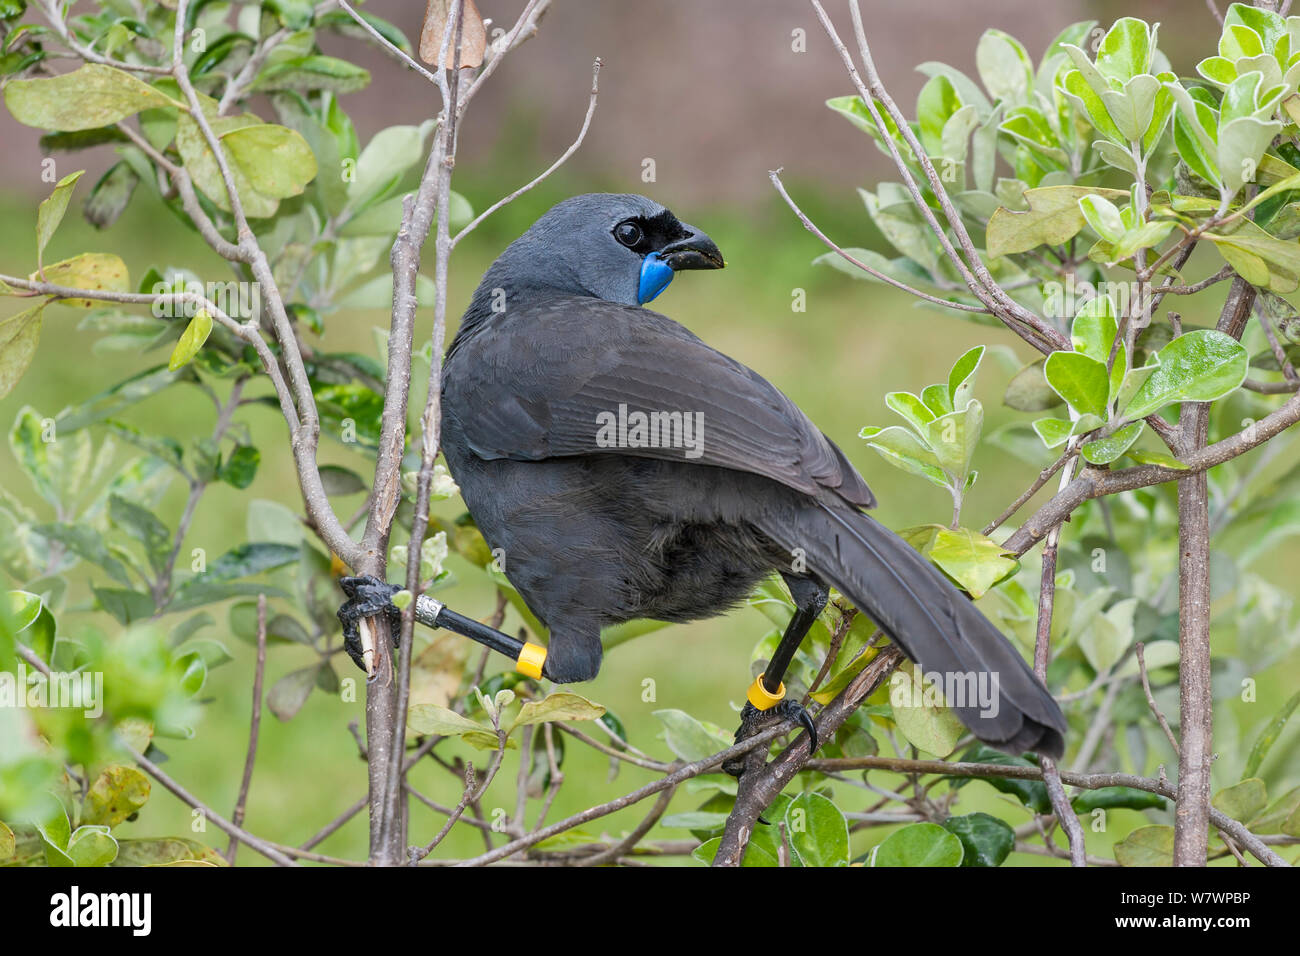 Adult female Kokako (Callaeas wilsoni) perched in a shrub showing the distinctive strong legs, black zoro mask and blue wattles of this species. Tiritiri Matangi Island, Auckland, New Zealand, October. Endangered species. Stock Photo